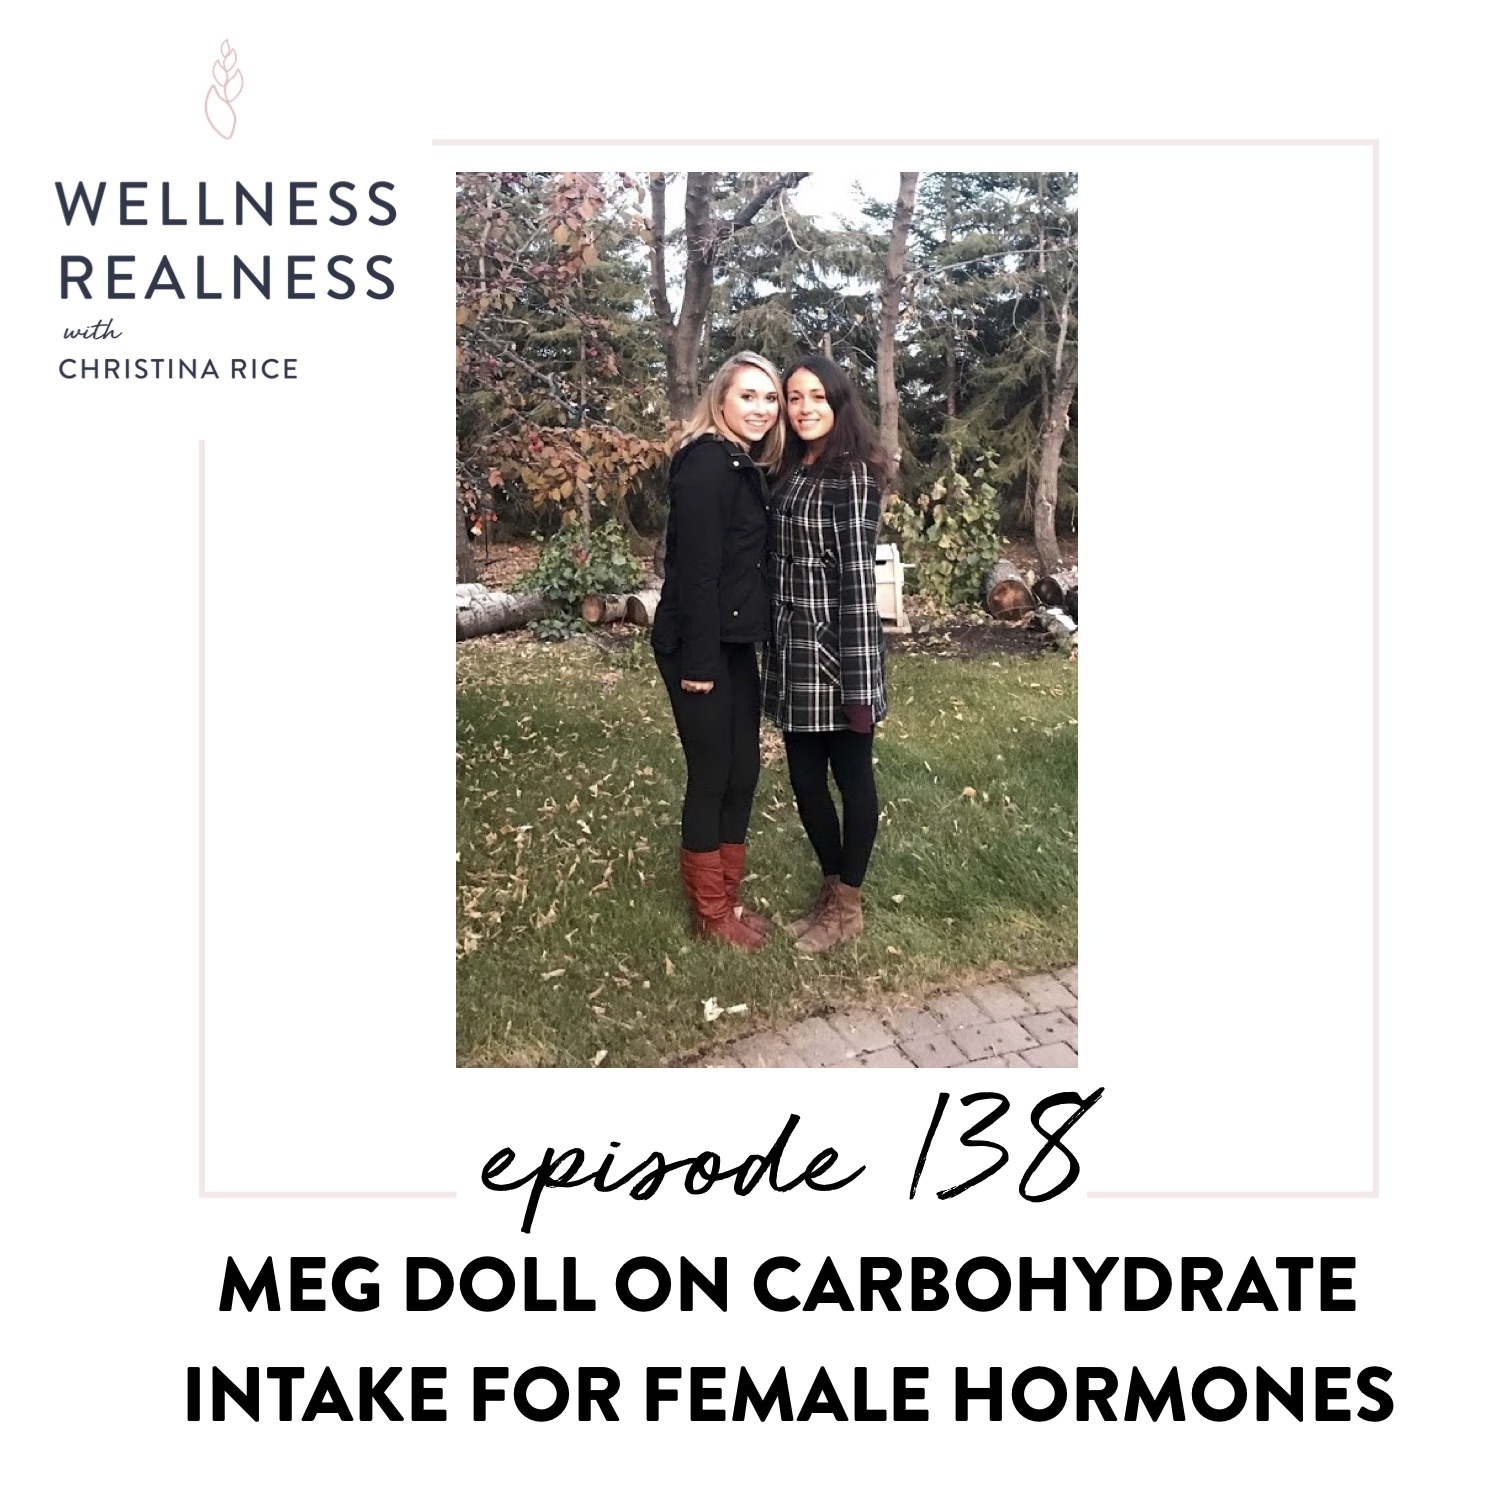 138: Meg Doll on Carbohydrate Intake for Female Hormones